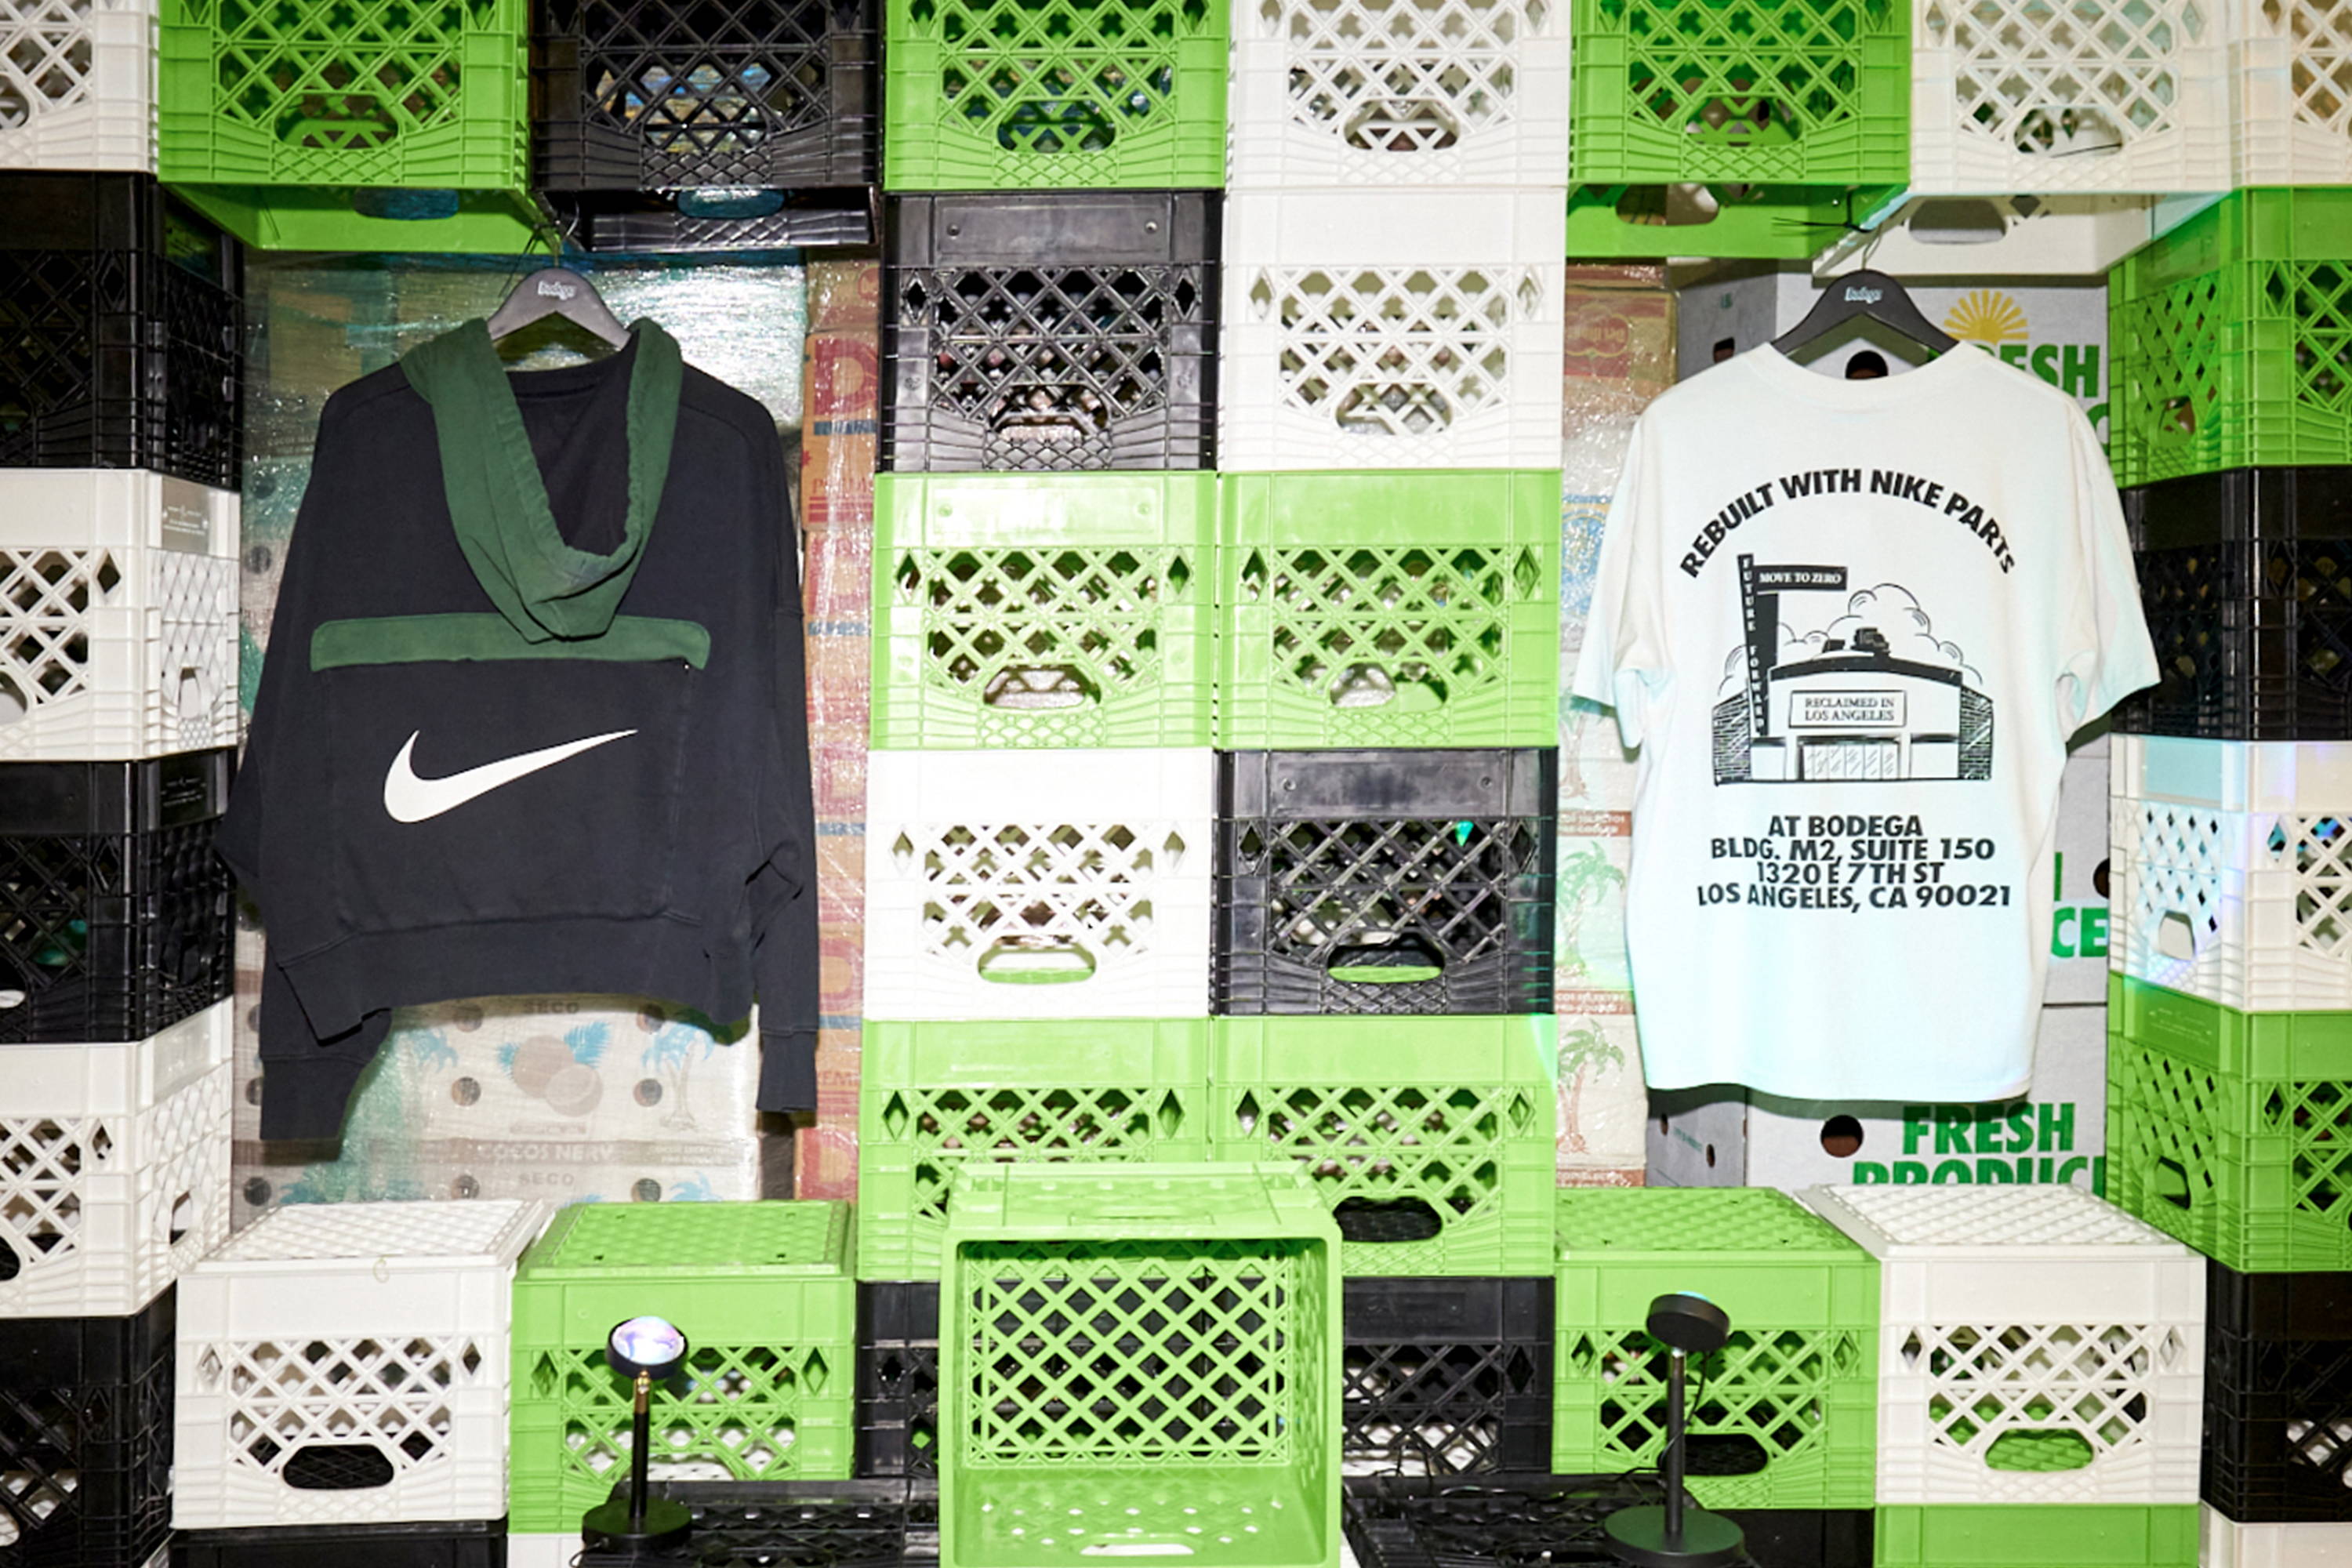 Event Recap: Re-creation x Reclaimed - Nike Re-Creation w/ Reclaimed Inc.